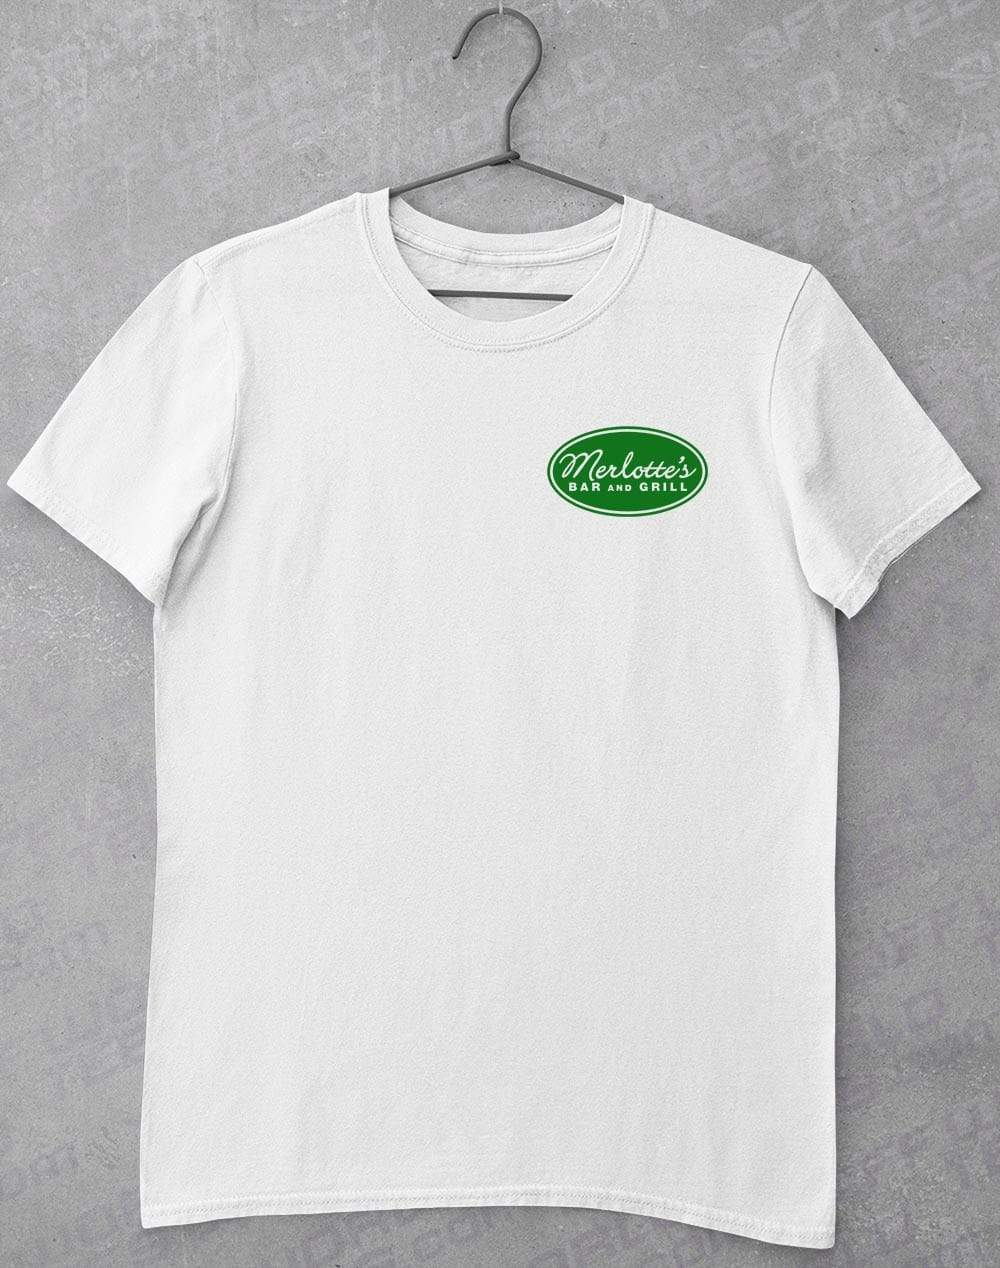 Merlotte's Bar and Grill T-Shirt (Men's Fit) L / White  - Off World Tees